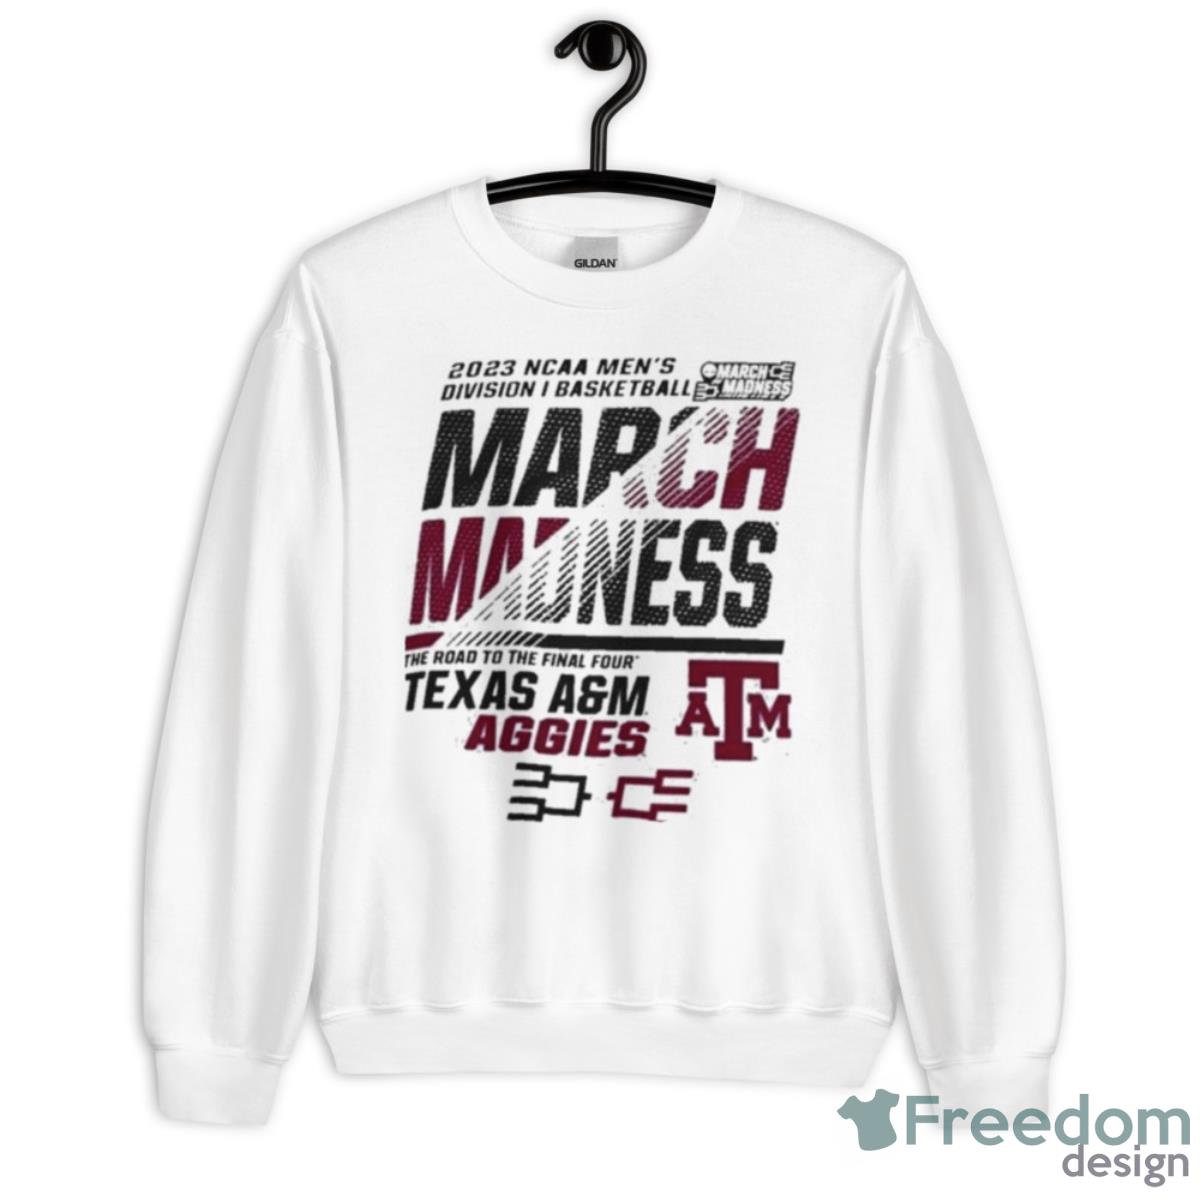 Texas A&M Men’s Basketball 2023 NCAA March Madness The Road To Final Four Shirt